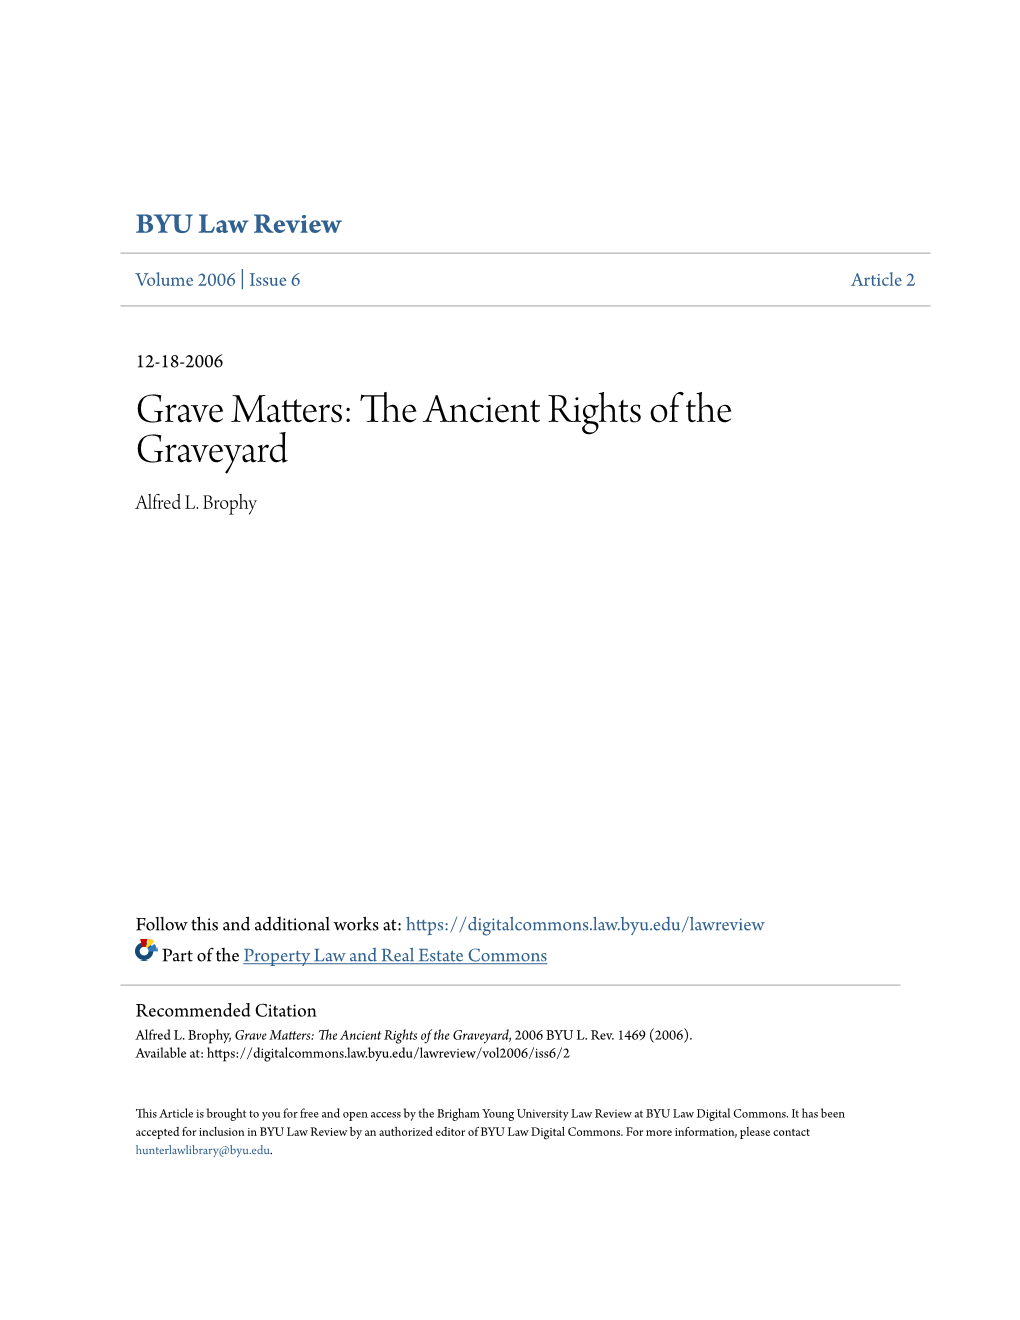 Grave Matters: the Ancient Rights of the Graveyard Alfred L